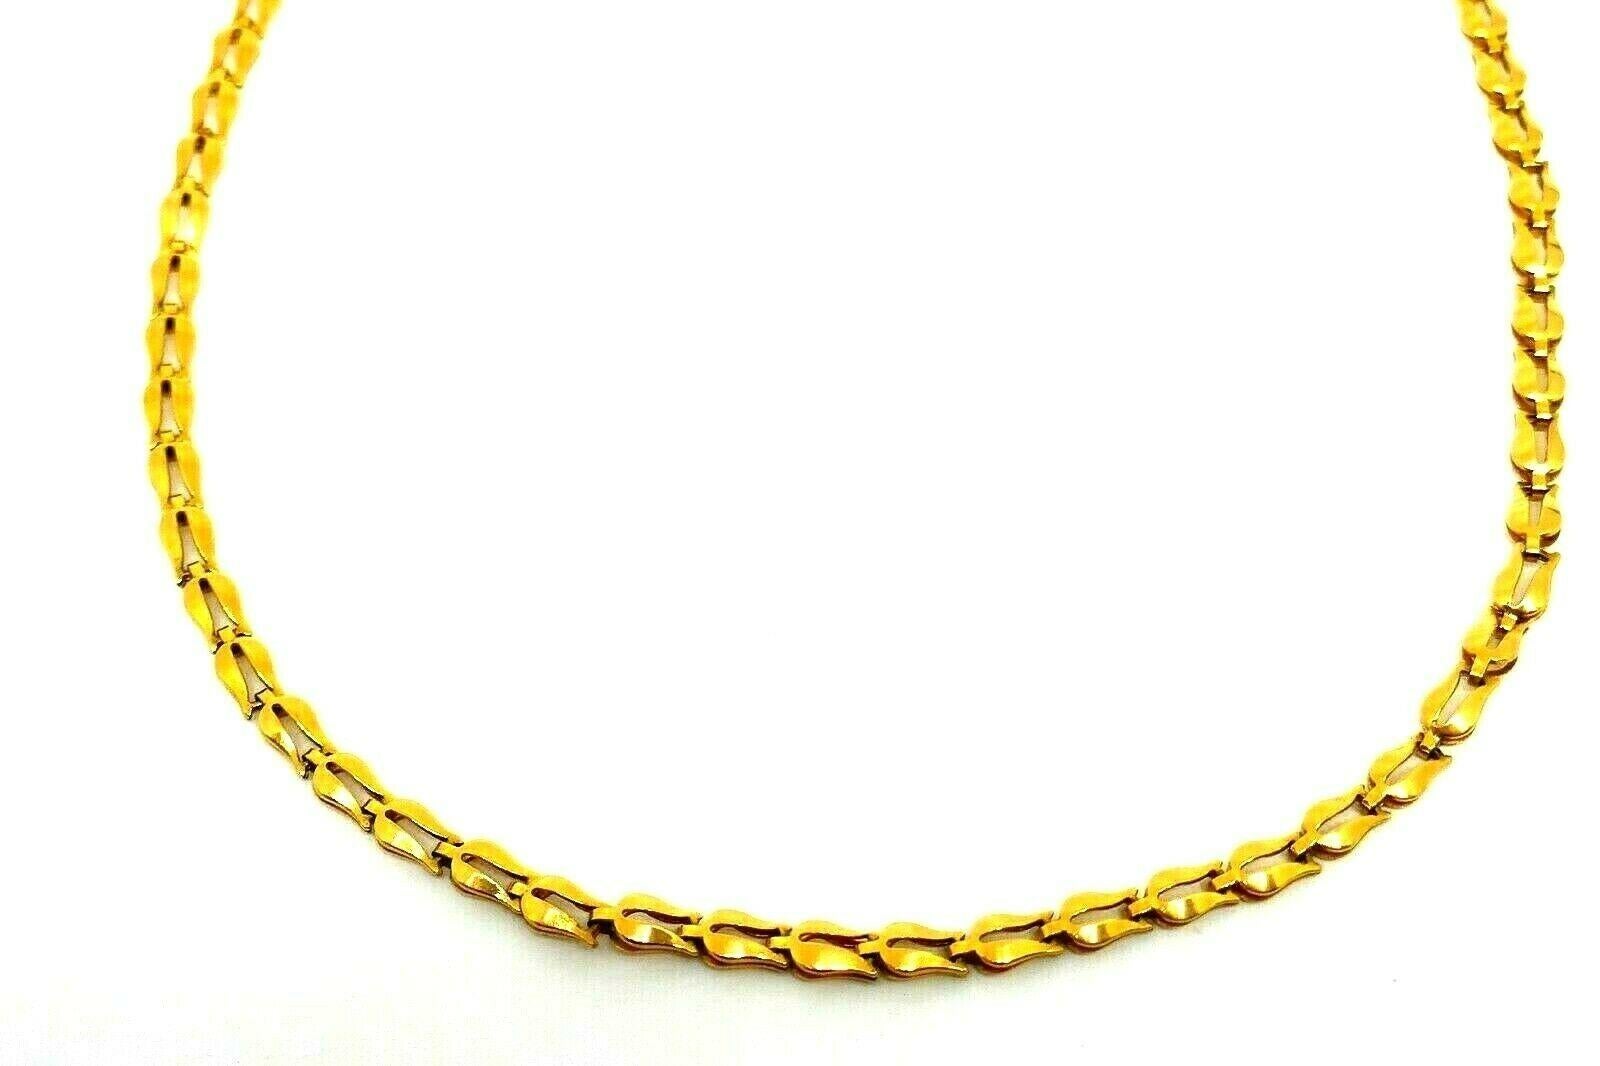 Unique delicate Tulip link chain necklace by Ilias Lalaounis. Made of 18k yellow gold. Stamped with the Lalaounis maker's mark, a hallmark for 18k gold and a country of origin (Greece).
Measurements: 17